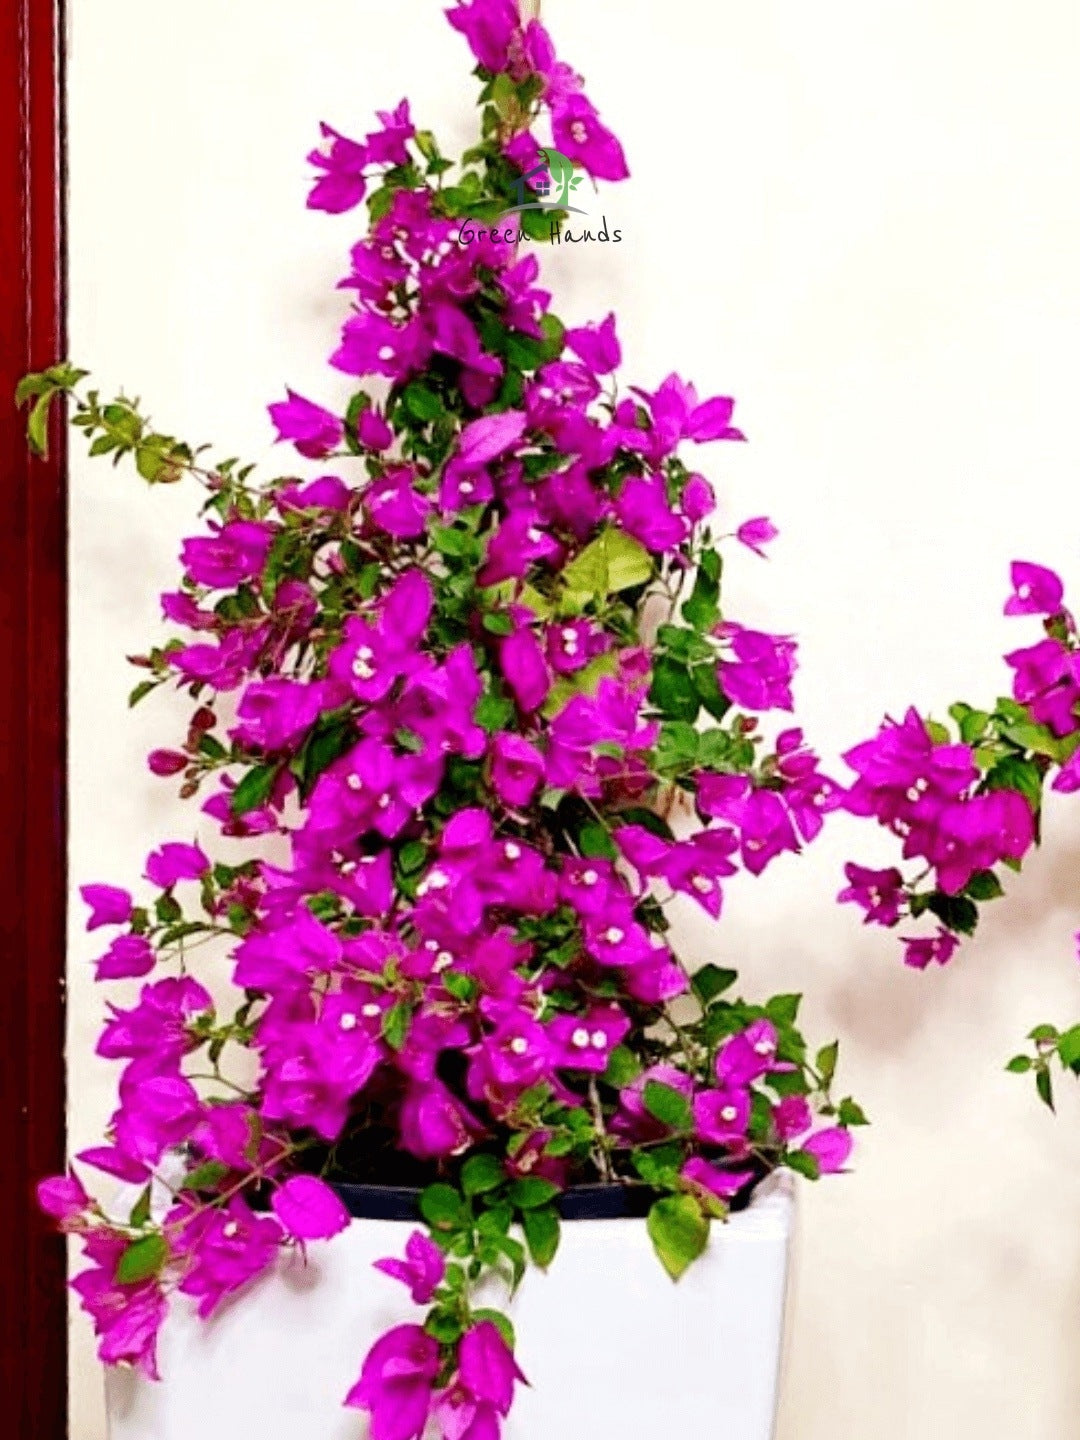 Potted Large Bougainvillea Planted in Ceramic Purple